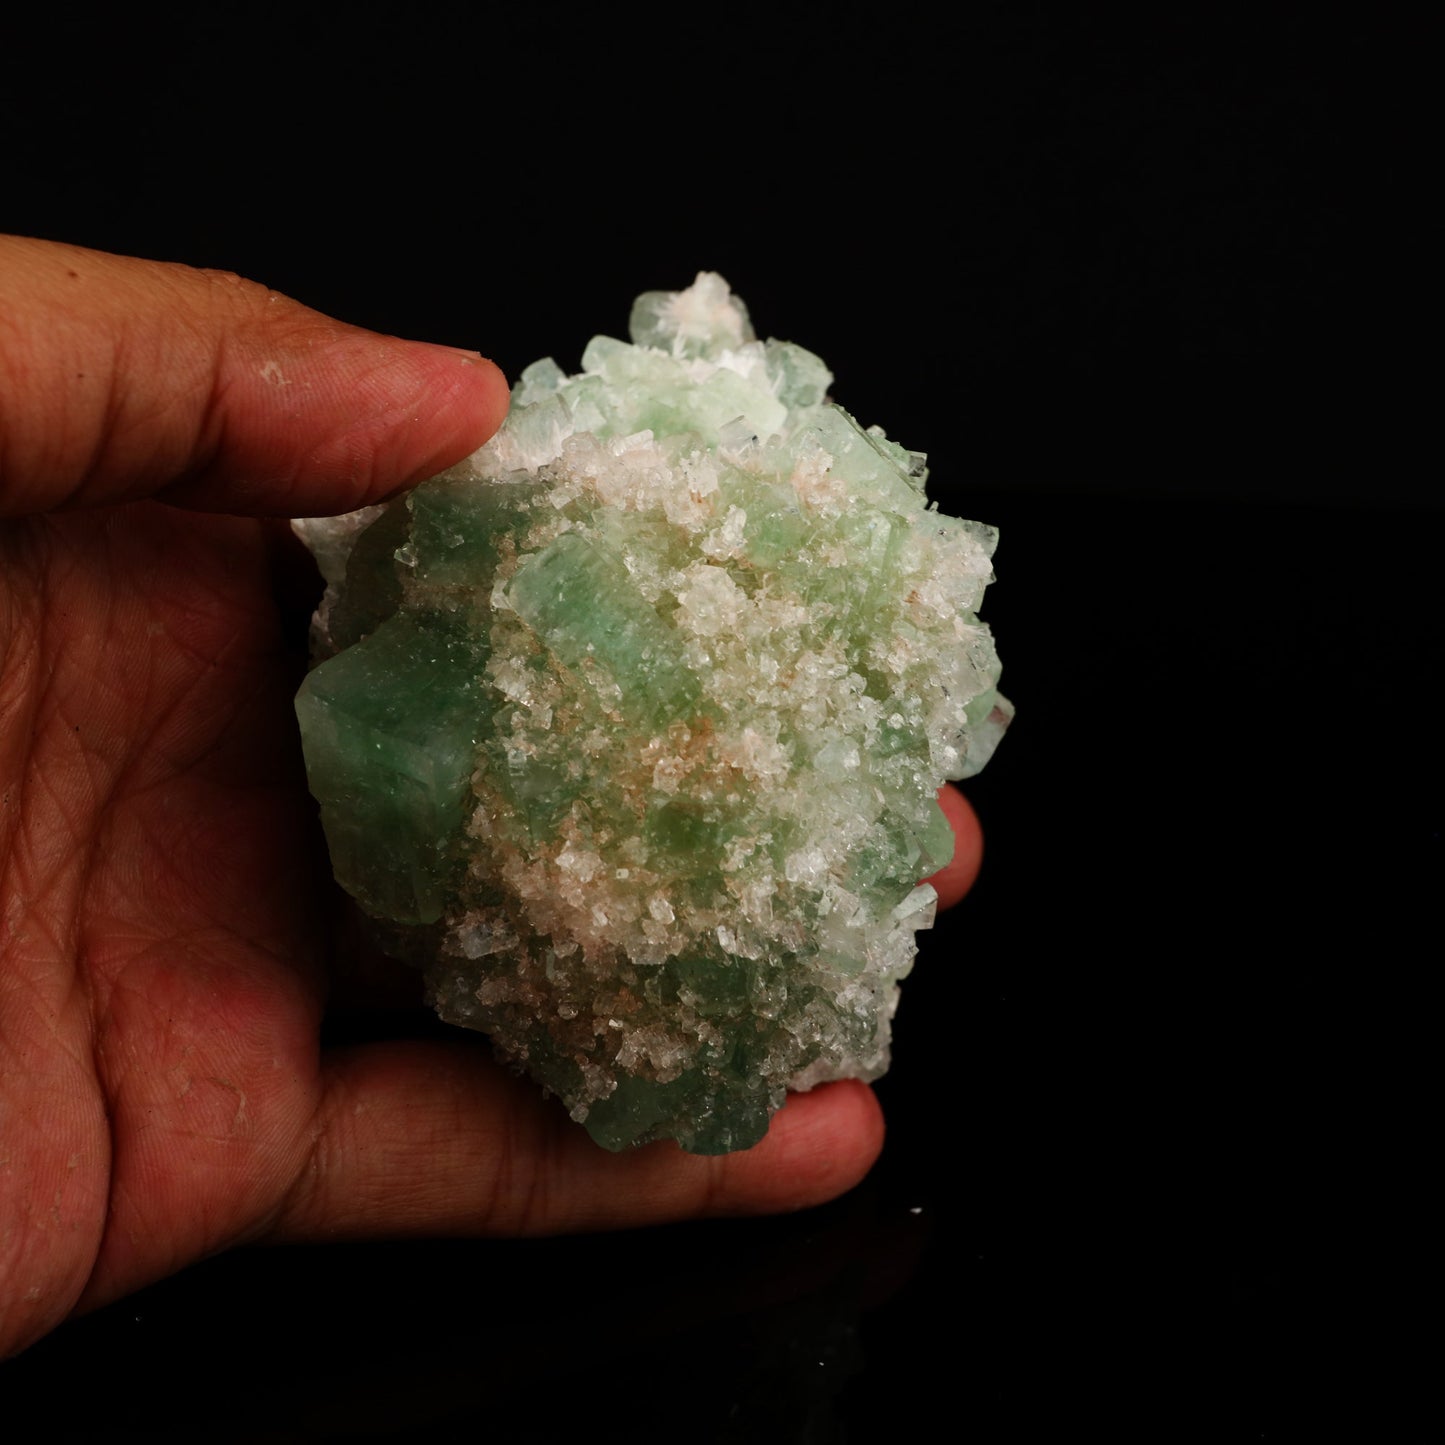 Apophyllite Cubes green Natural Mineral Specimen # B 5549  https://www.superbminerals.us/products/apophyllite-cubes-green-natural-mineral-specimen-b-5549  Features:Primary Mineral(s): ApophylliteSecondary Mineral(s): N/AMatrix: N/ASize : 3 Inch x 4 InchWeight : 271 GmsLocality: Nashik , Maharashtra, India Fluorapophyllite crystals with peach Stilbite crystals on minor matrix from Nashik, excellent grade, sharp, glossy and doubly terminated. 